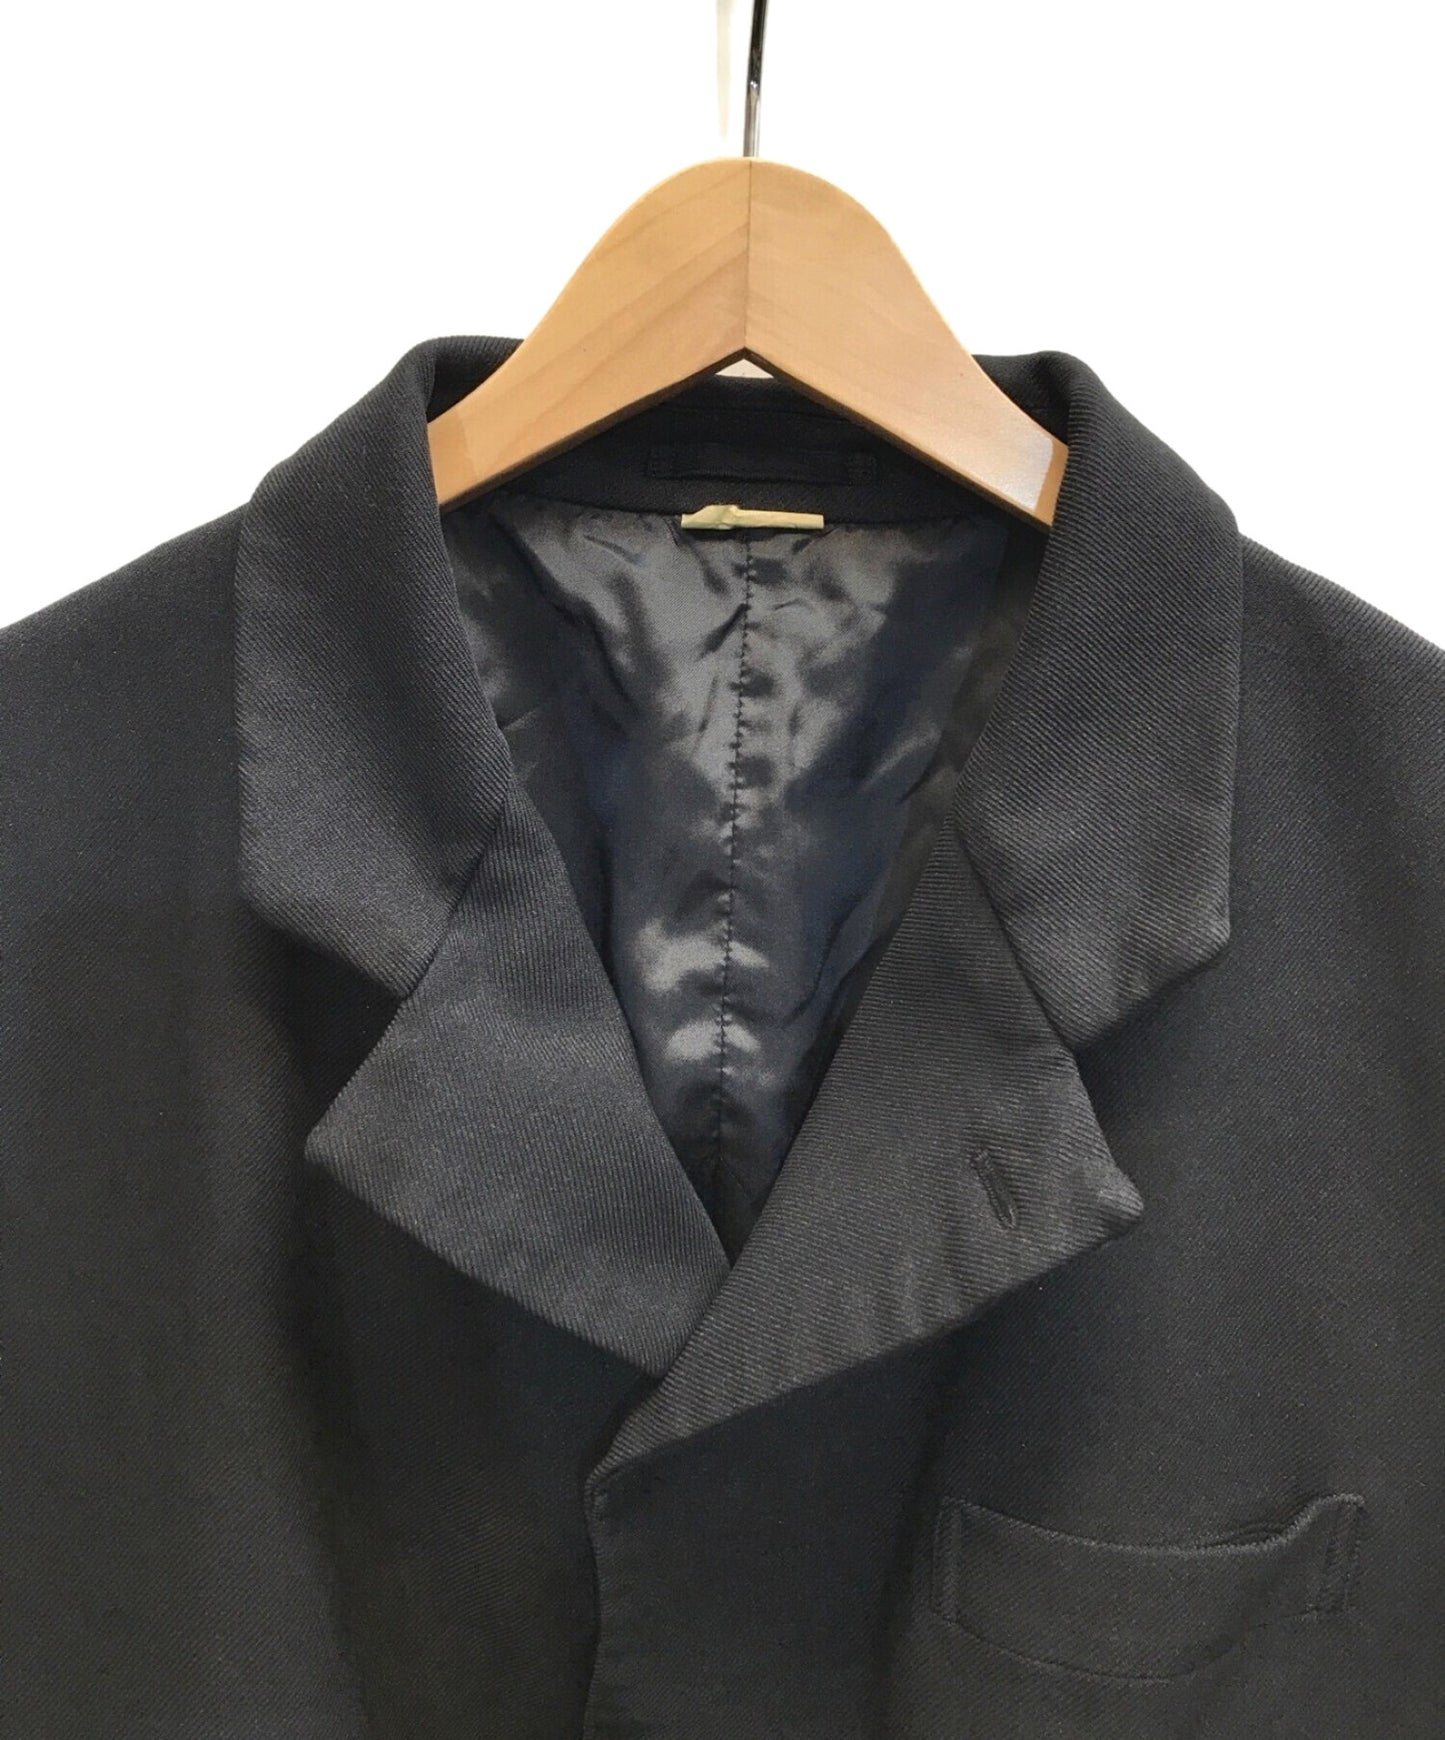 [Pre-owned] COMME des GARCONS HOMME DEUX TIE-WAIST SINGLE-BREASTED BLAZER DH-J027